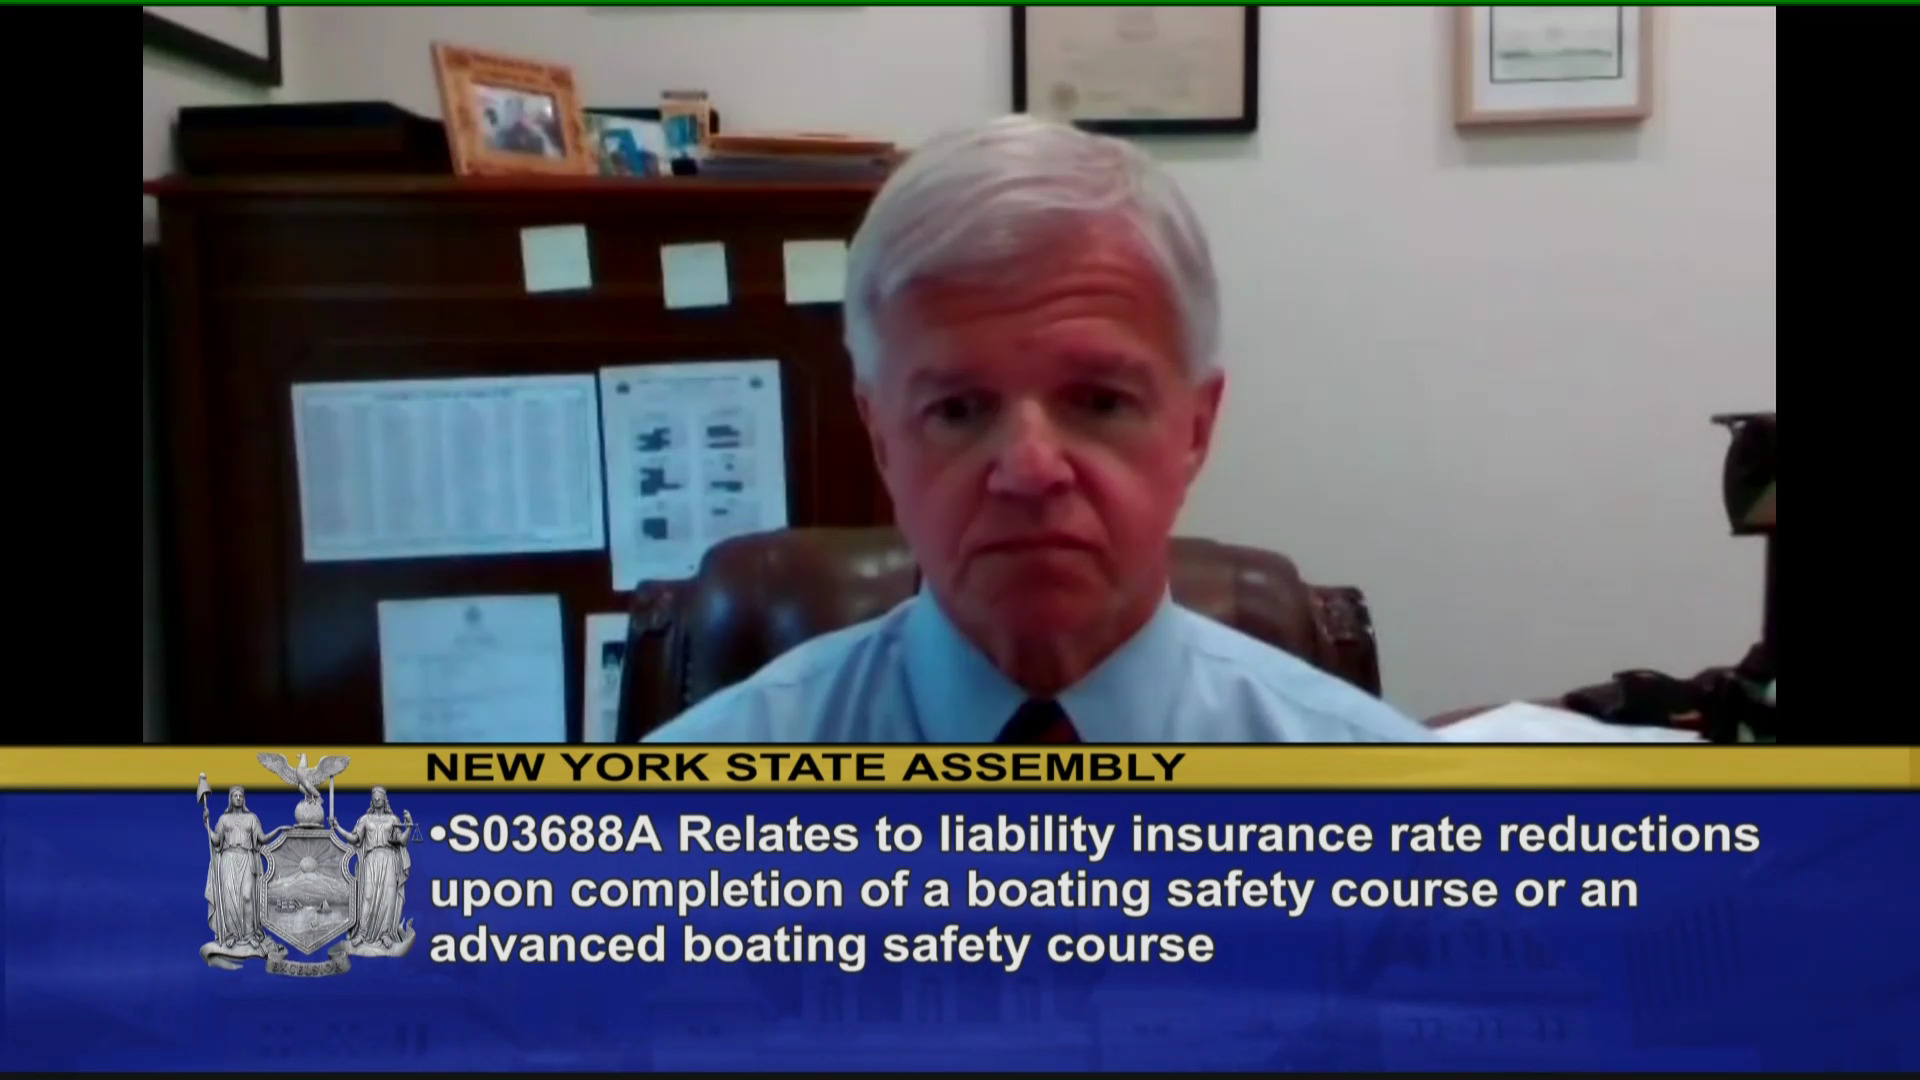 Insurance Reduction for Boating Safety Course